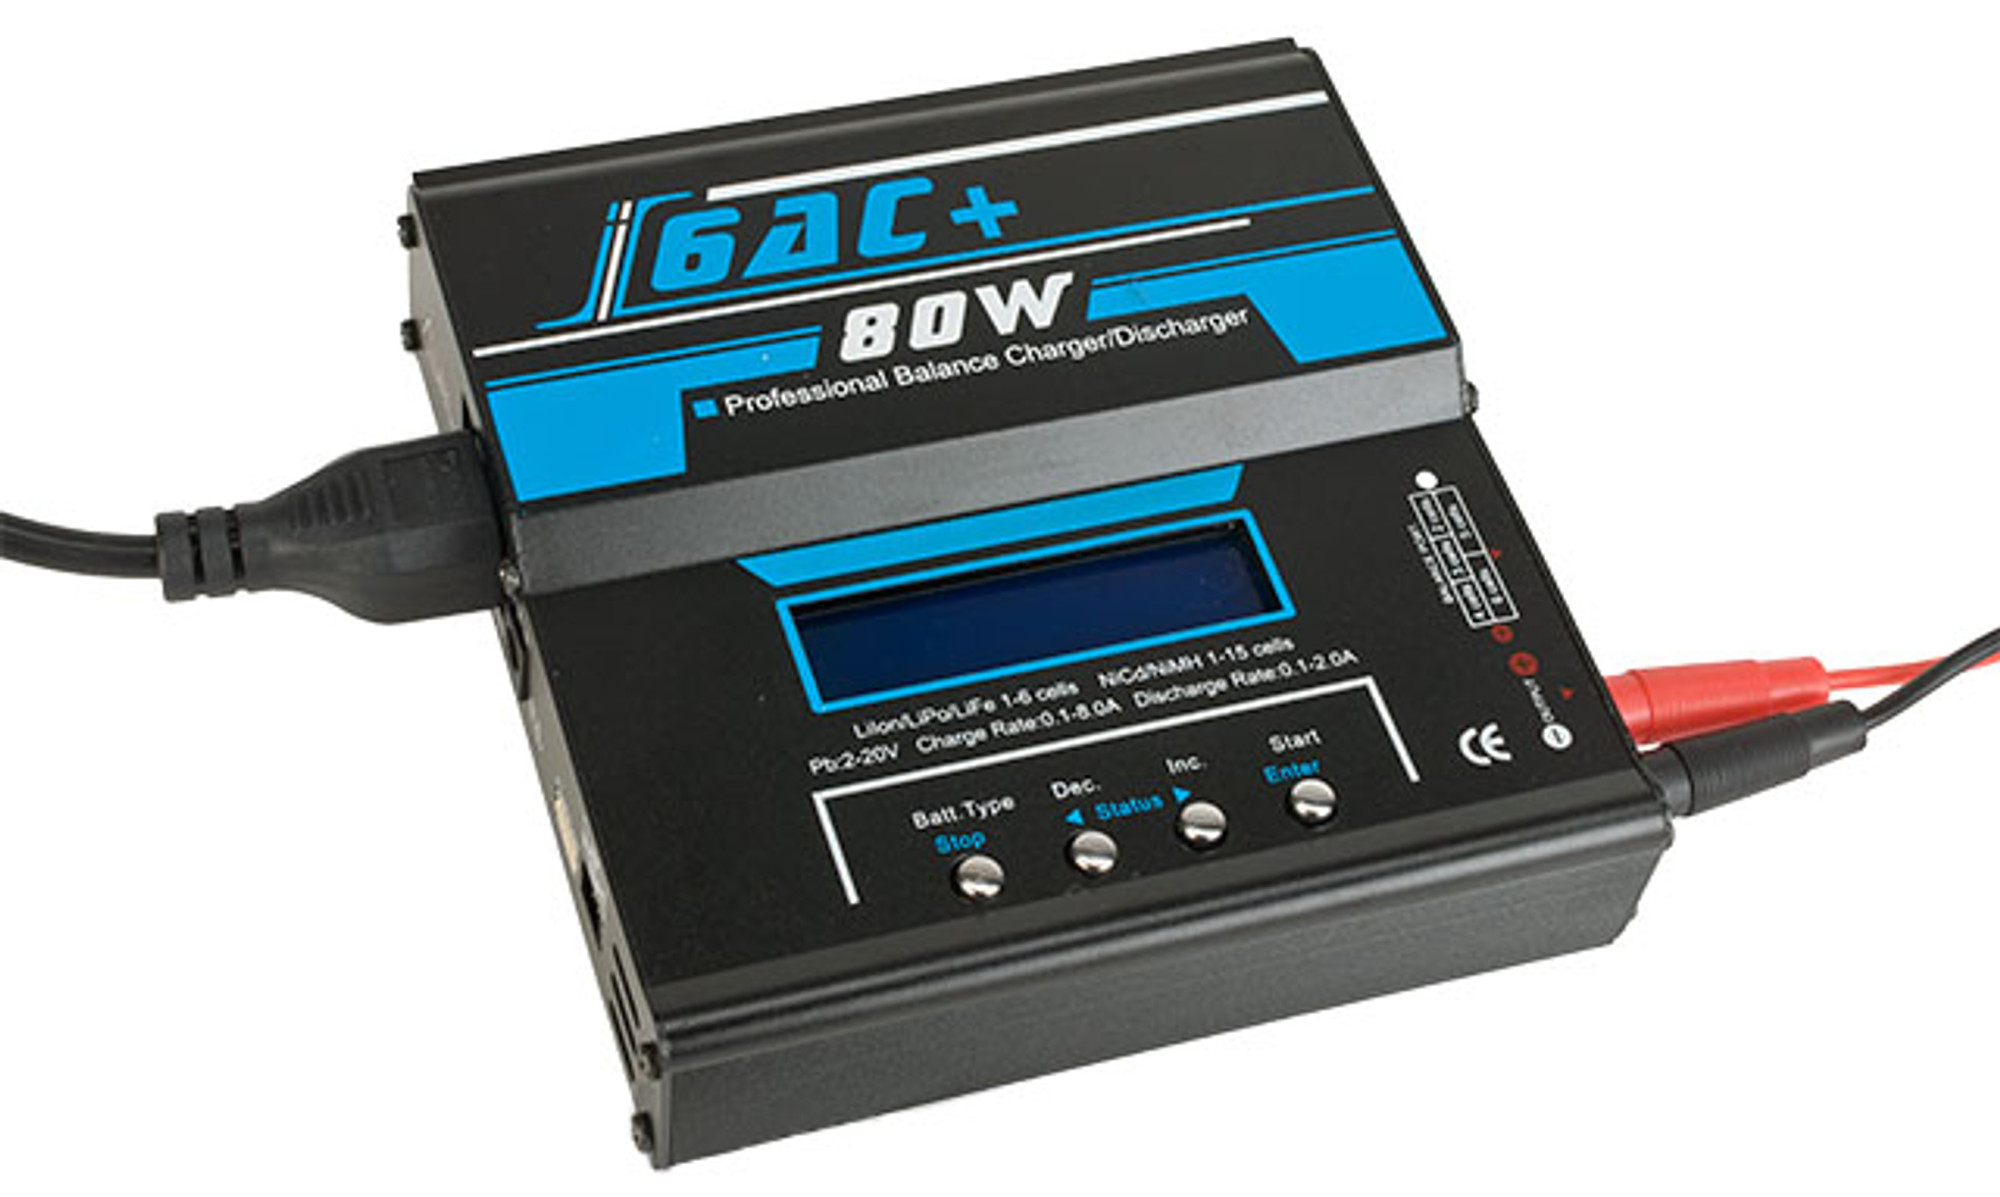 Ipower 6AC PRO 80W/5A Computer Battery Balancer Charger (NiCd NiMh Lipoly LiMn)